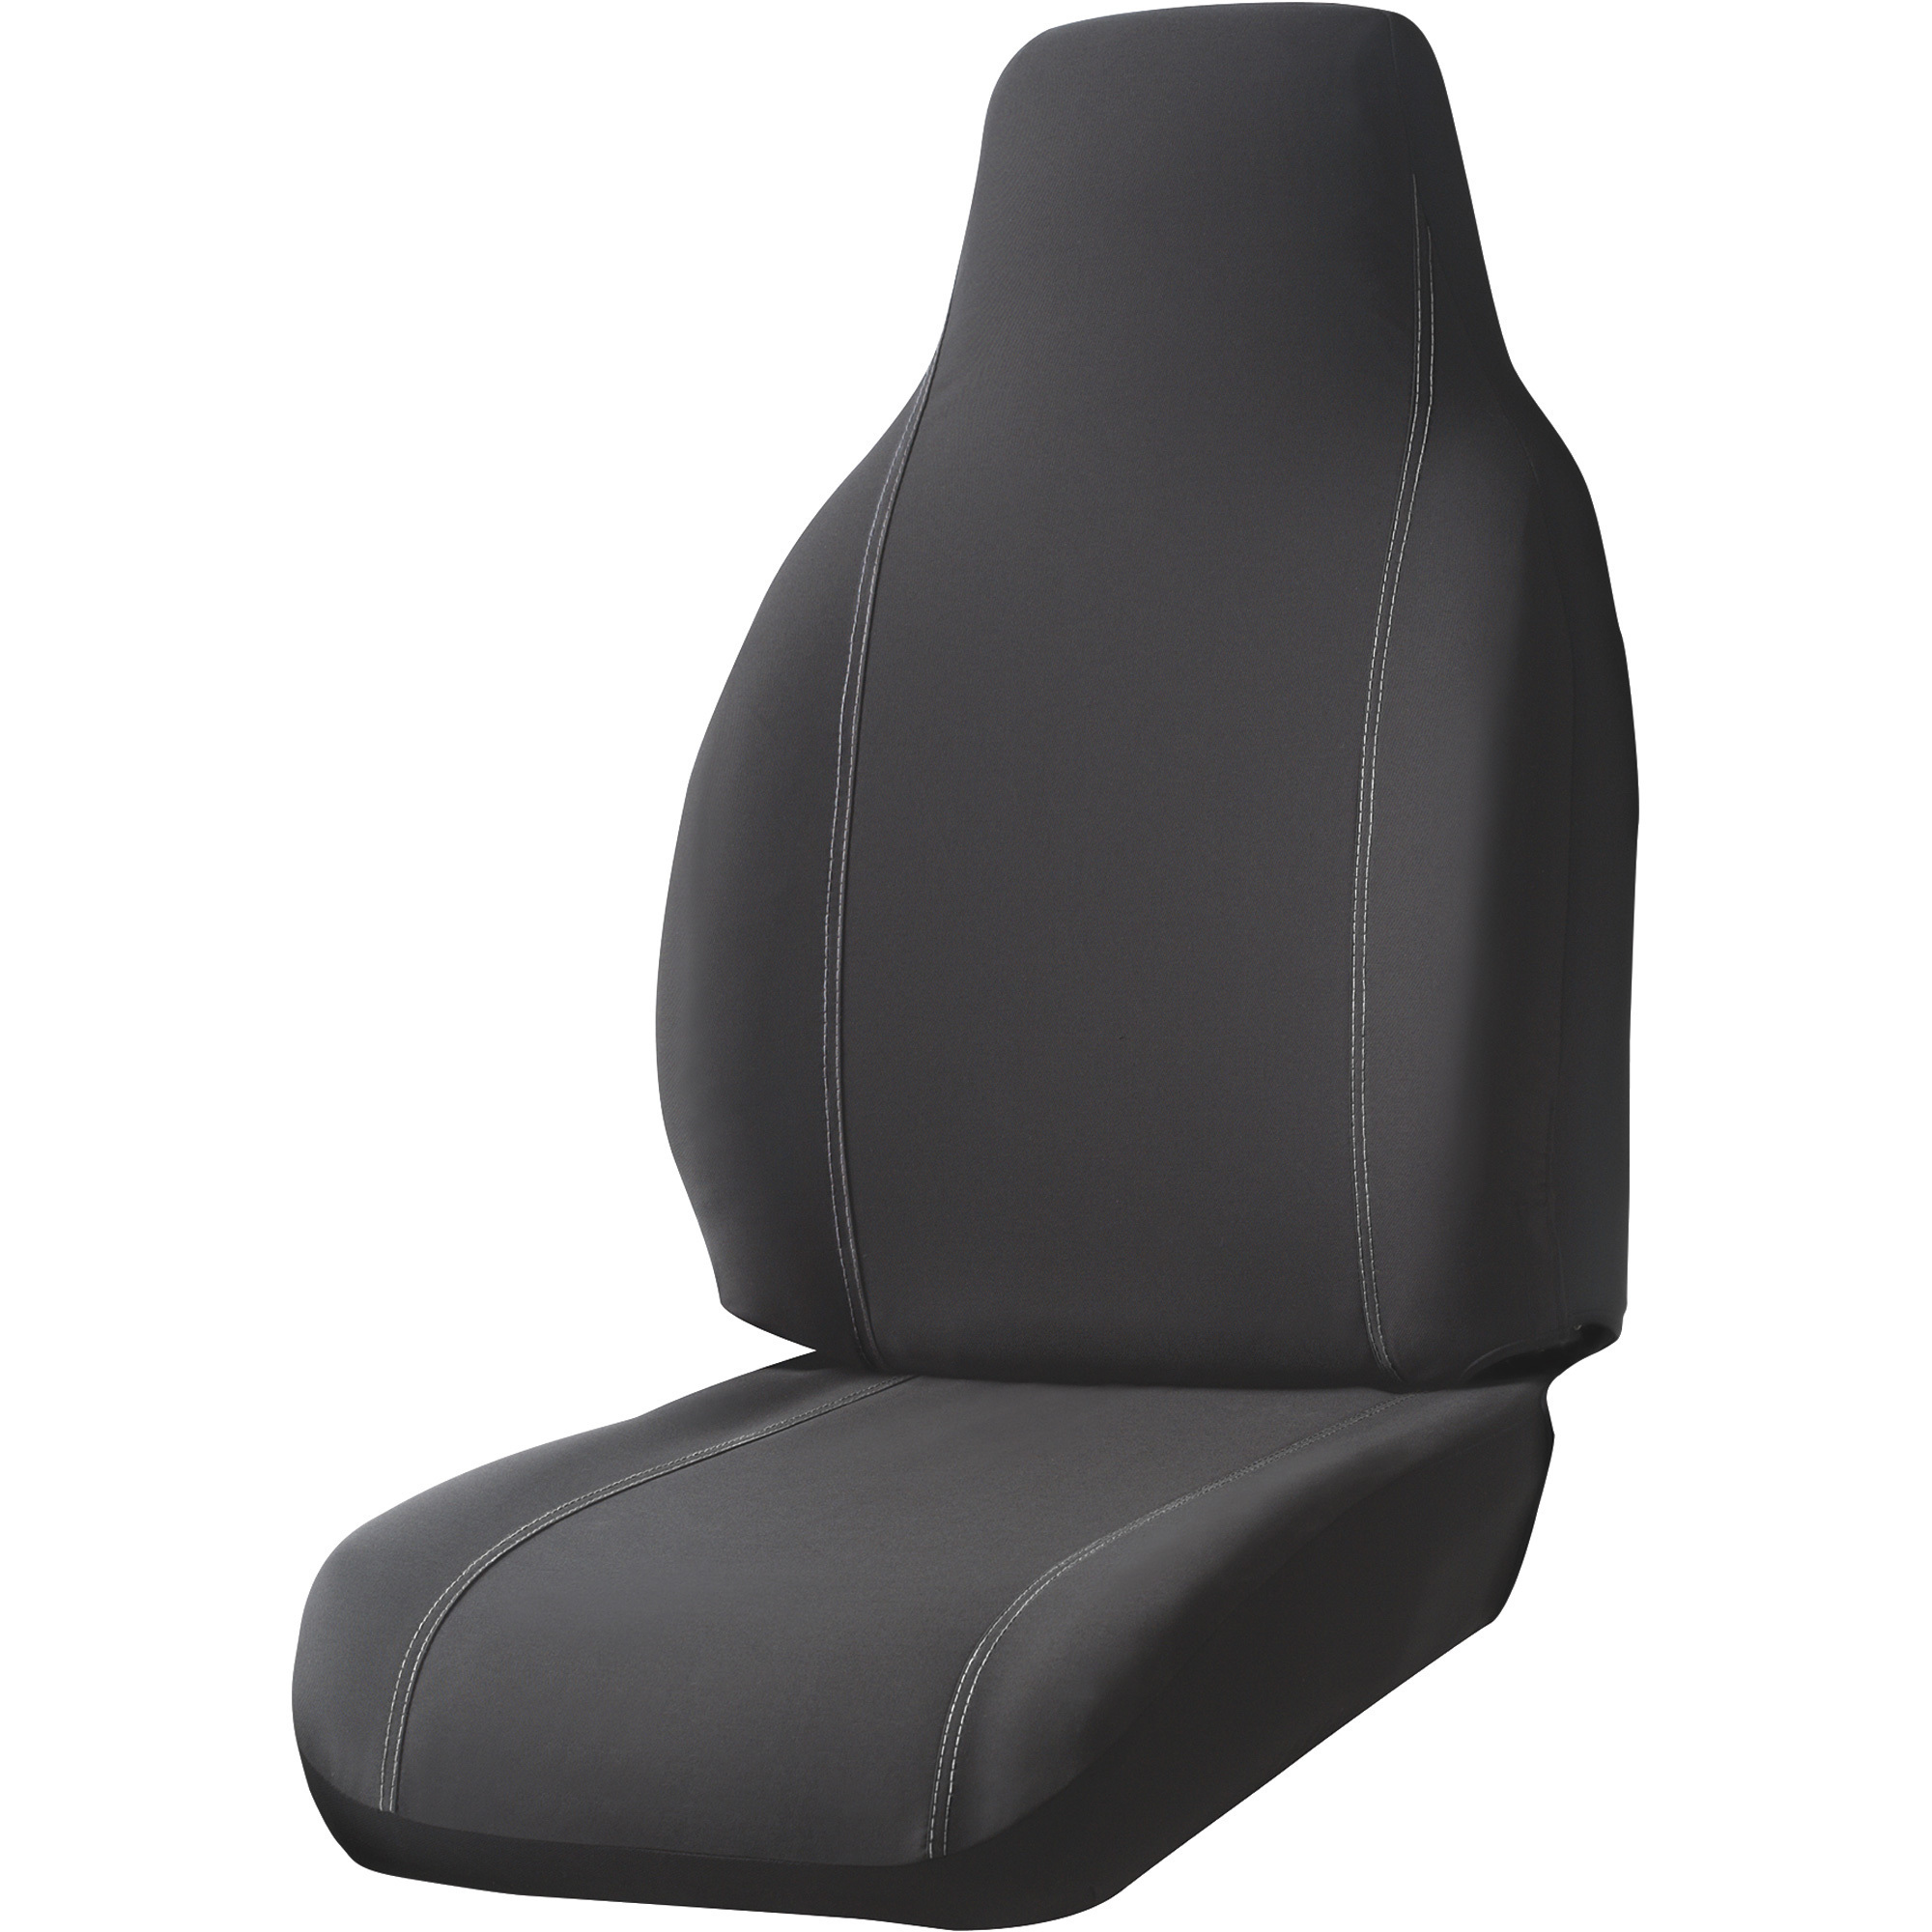 FiA Bostrom Wide Ride High-Back Bucket Seat and Armrest Covers â Black, Single Bucket, Model SP8005 BLACK